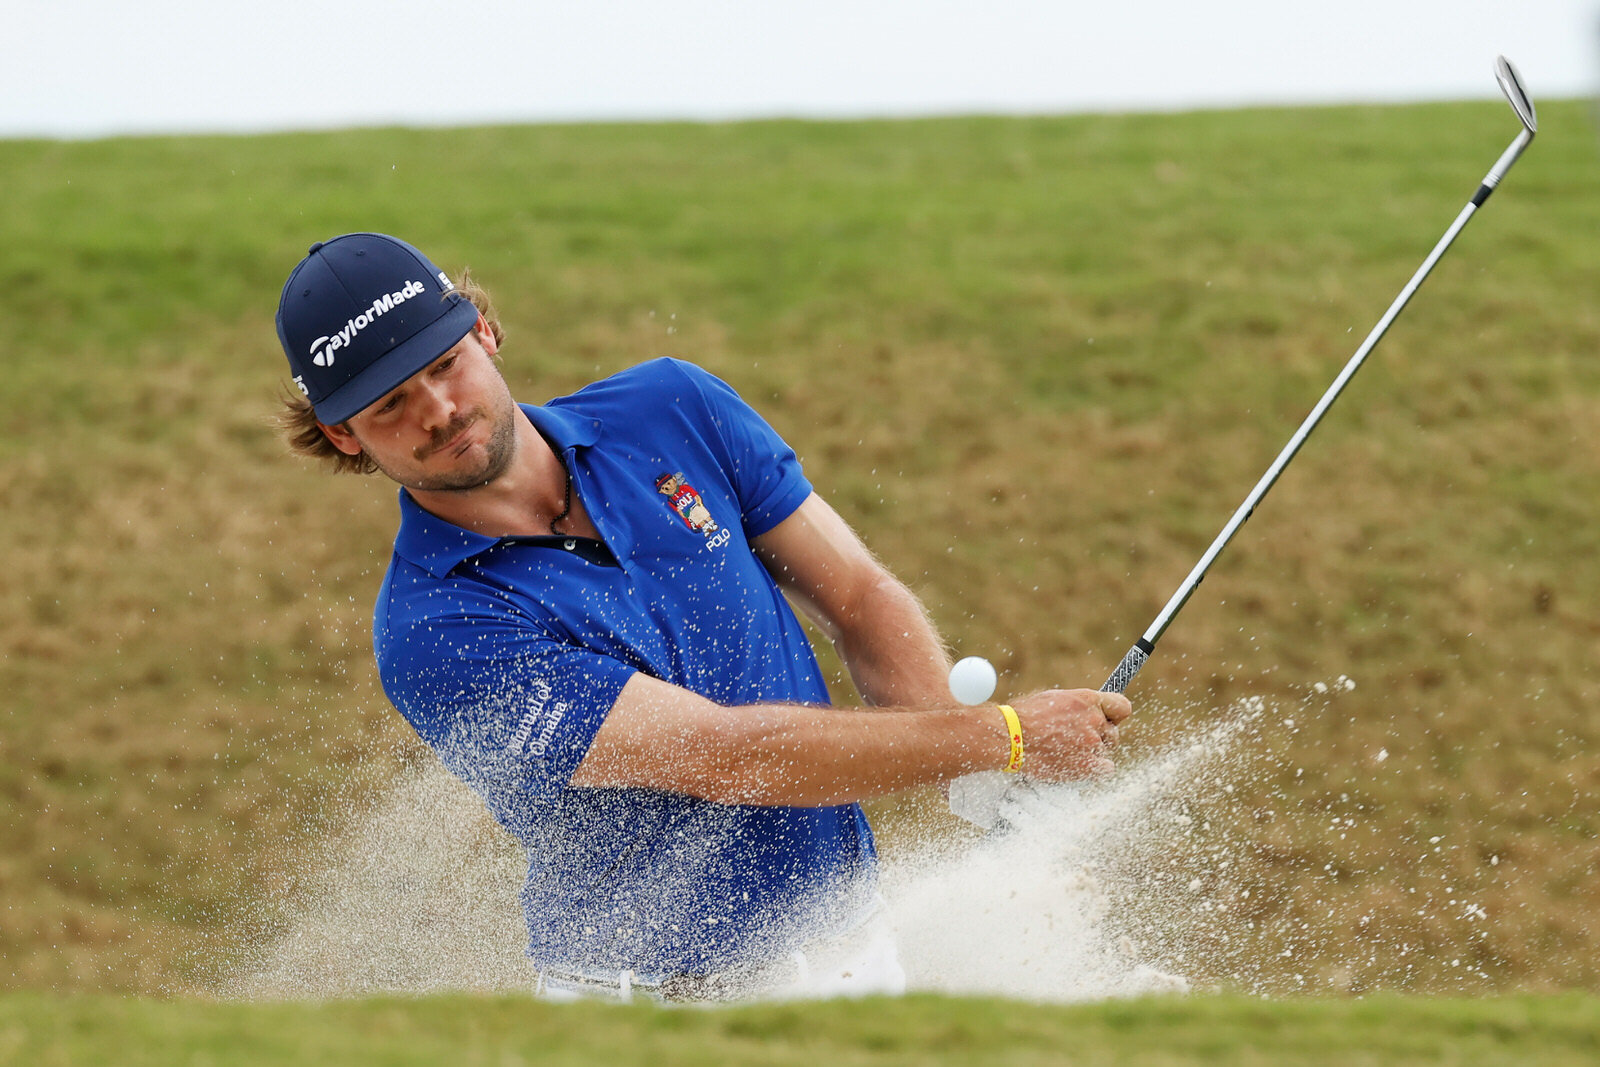  SOUTHAMPTON, BERMUDA - OCTOBER 29: Doc Redman of the United States plays a shot from a bunker on the ninth hole during the first round of the Bermuda Championship at Port Royal Golf Course on October 29, 2020 in Southampton, Bermuda. (Photo by Grego